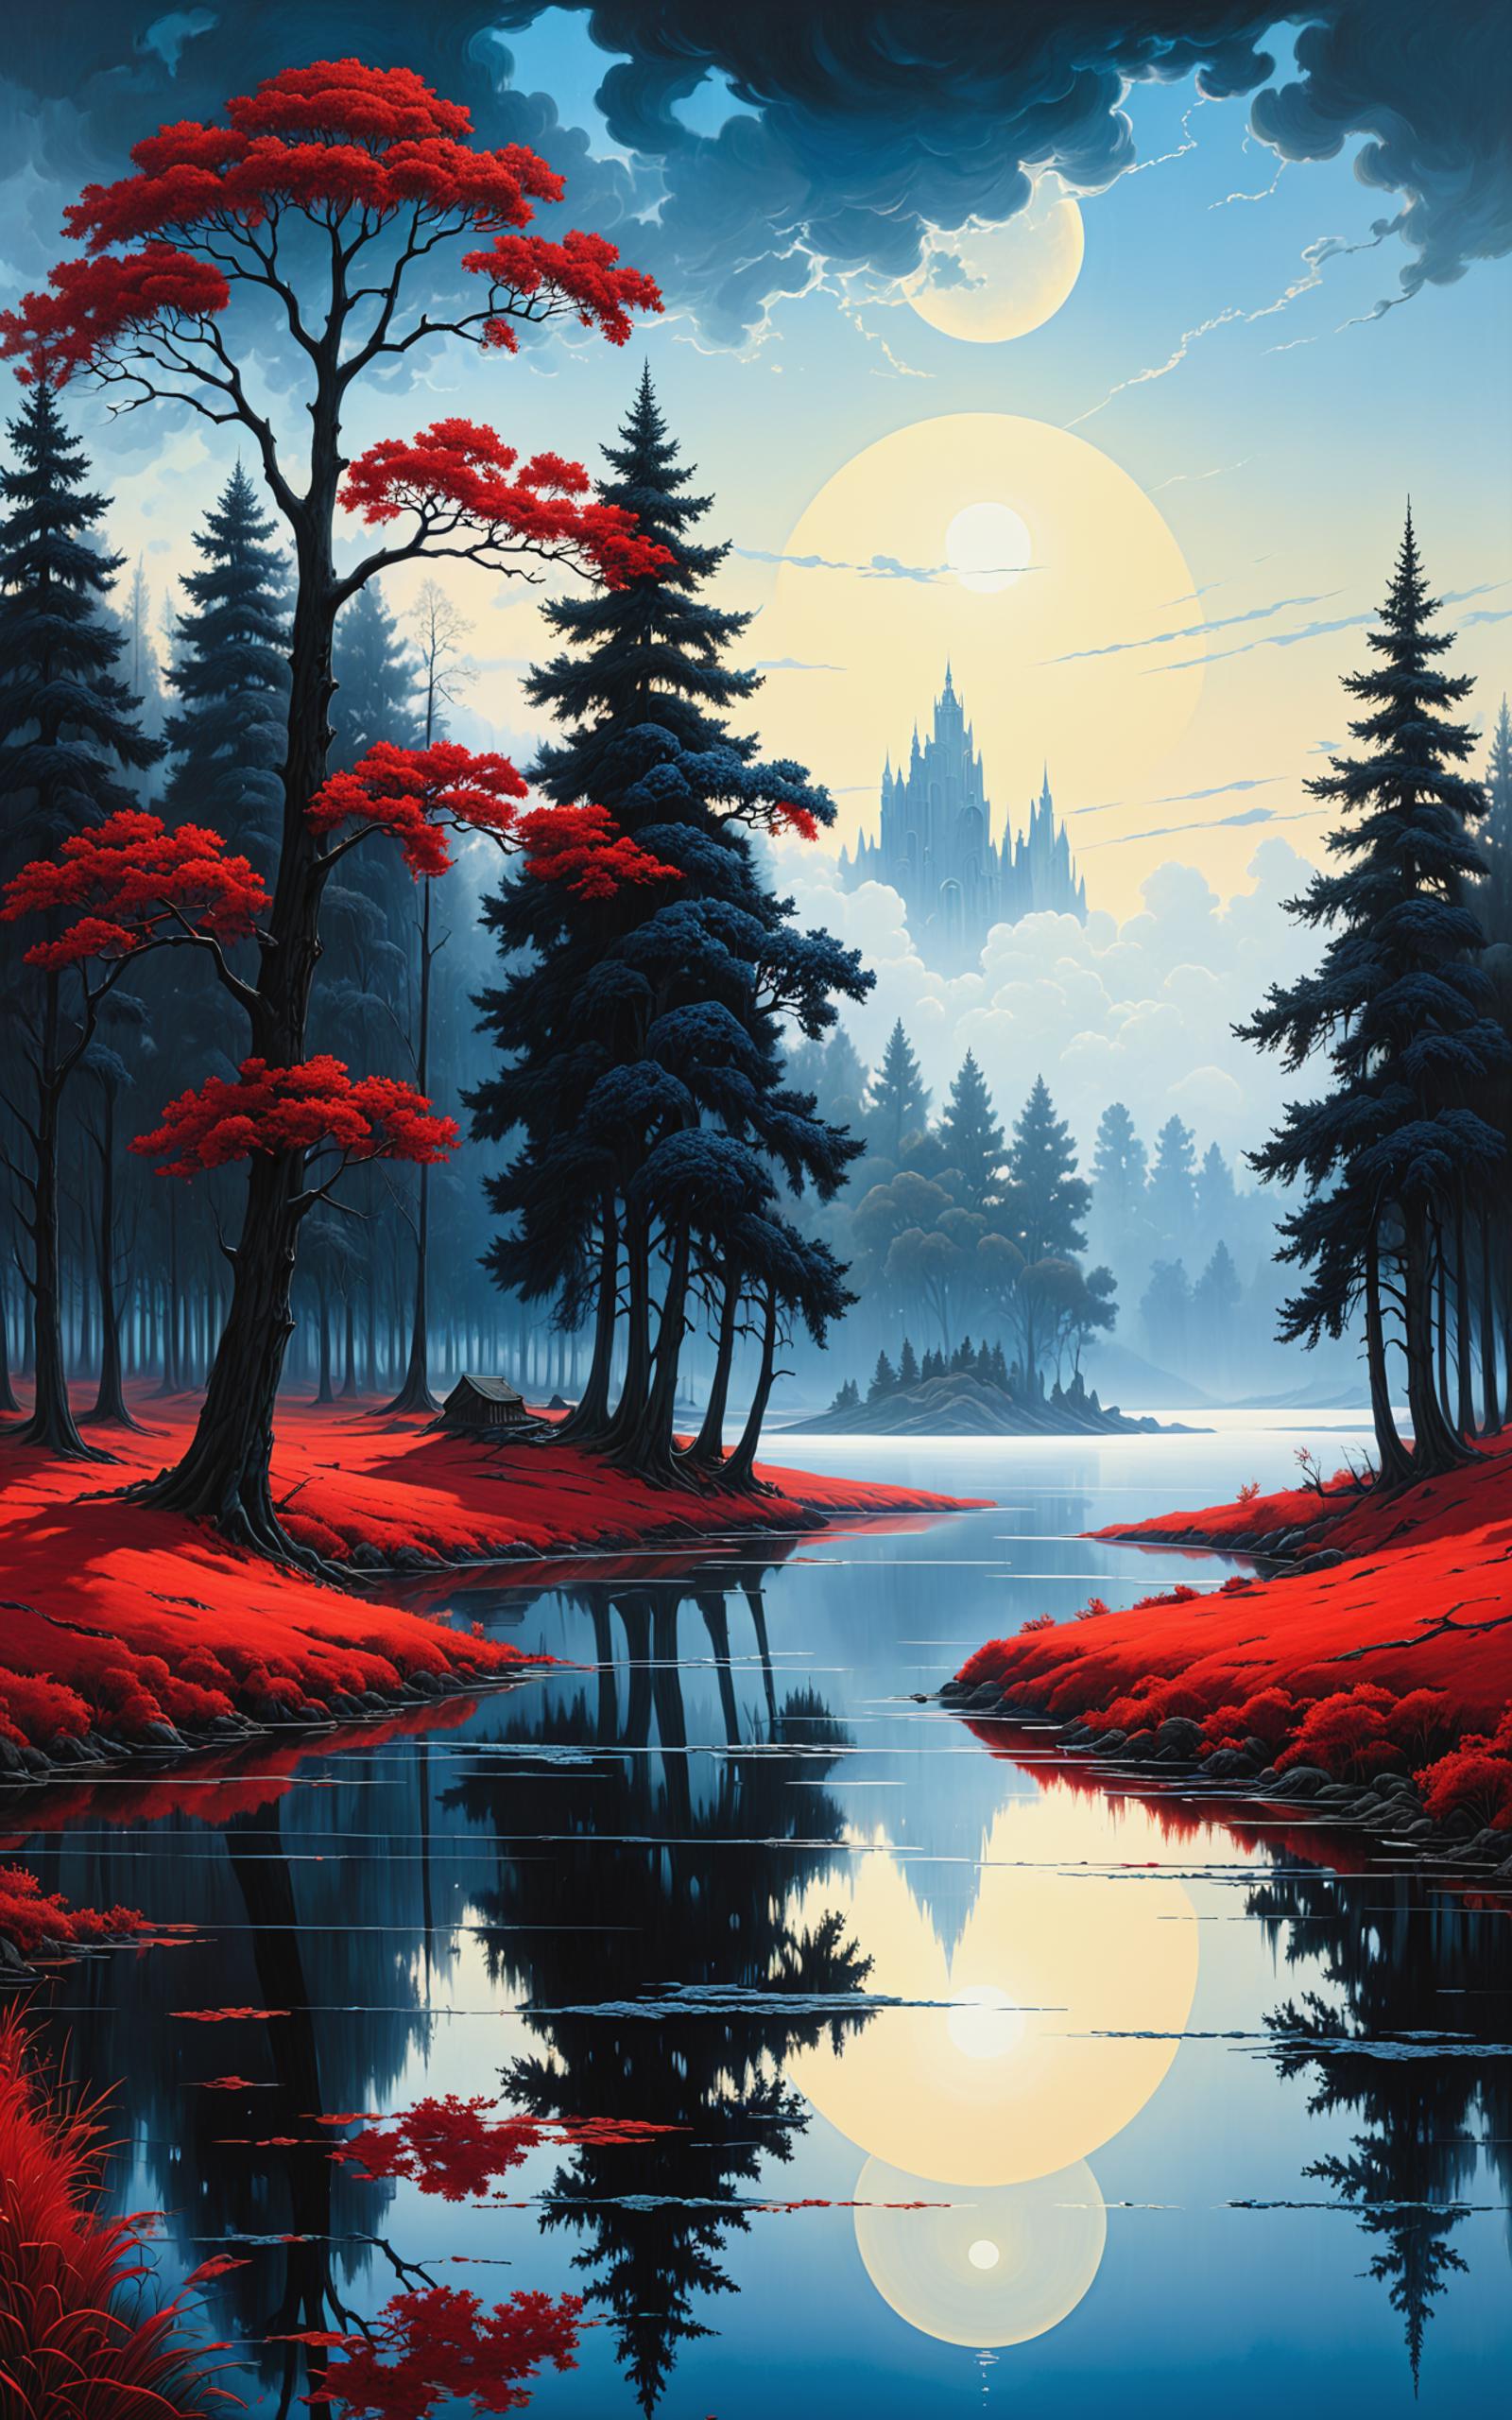 A Painting of a Forest with a Lake and a Moon at Night